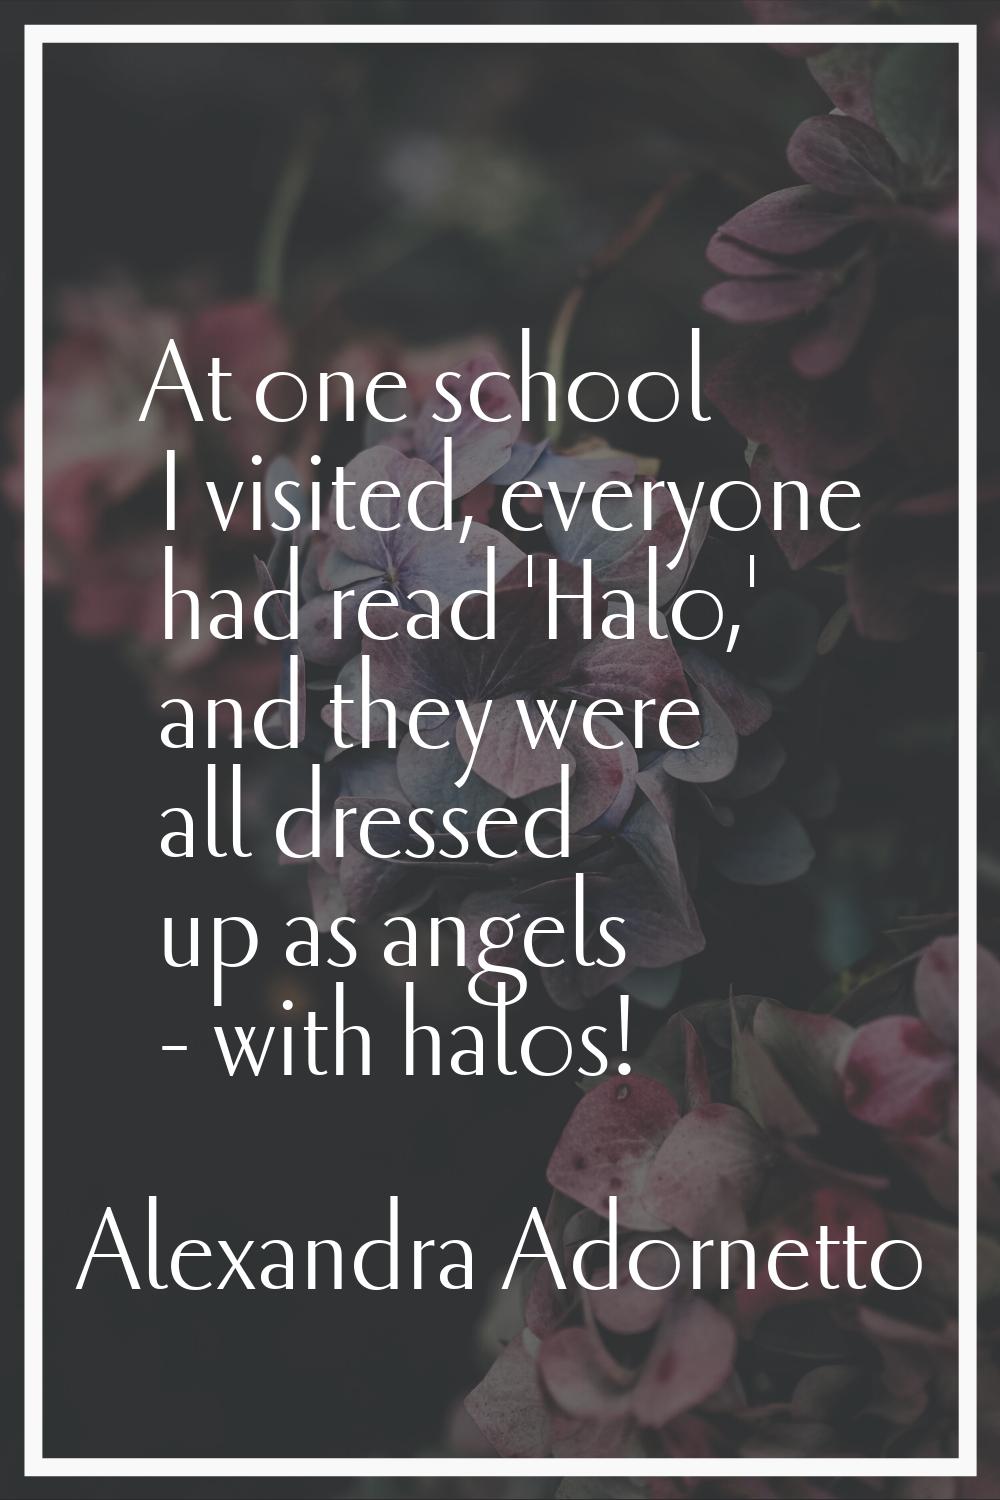 At one school I visited, everyone had read 'Halo,' and they were all dressed up as angels - with ha